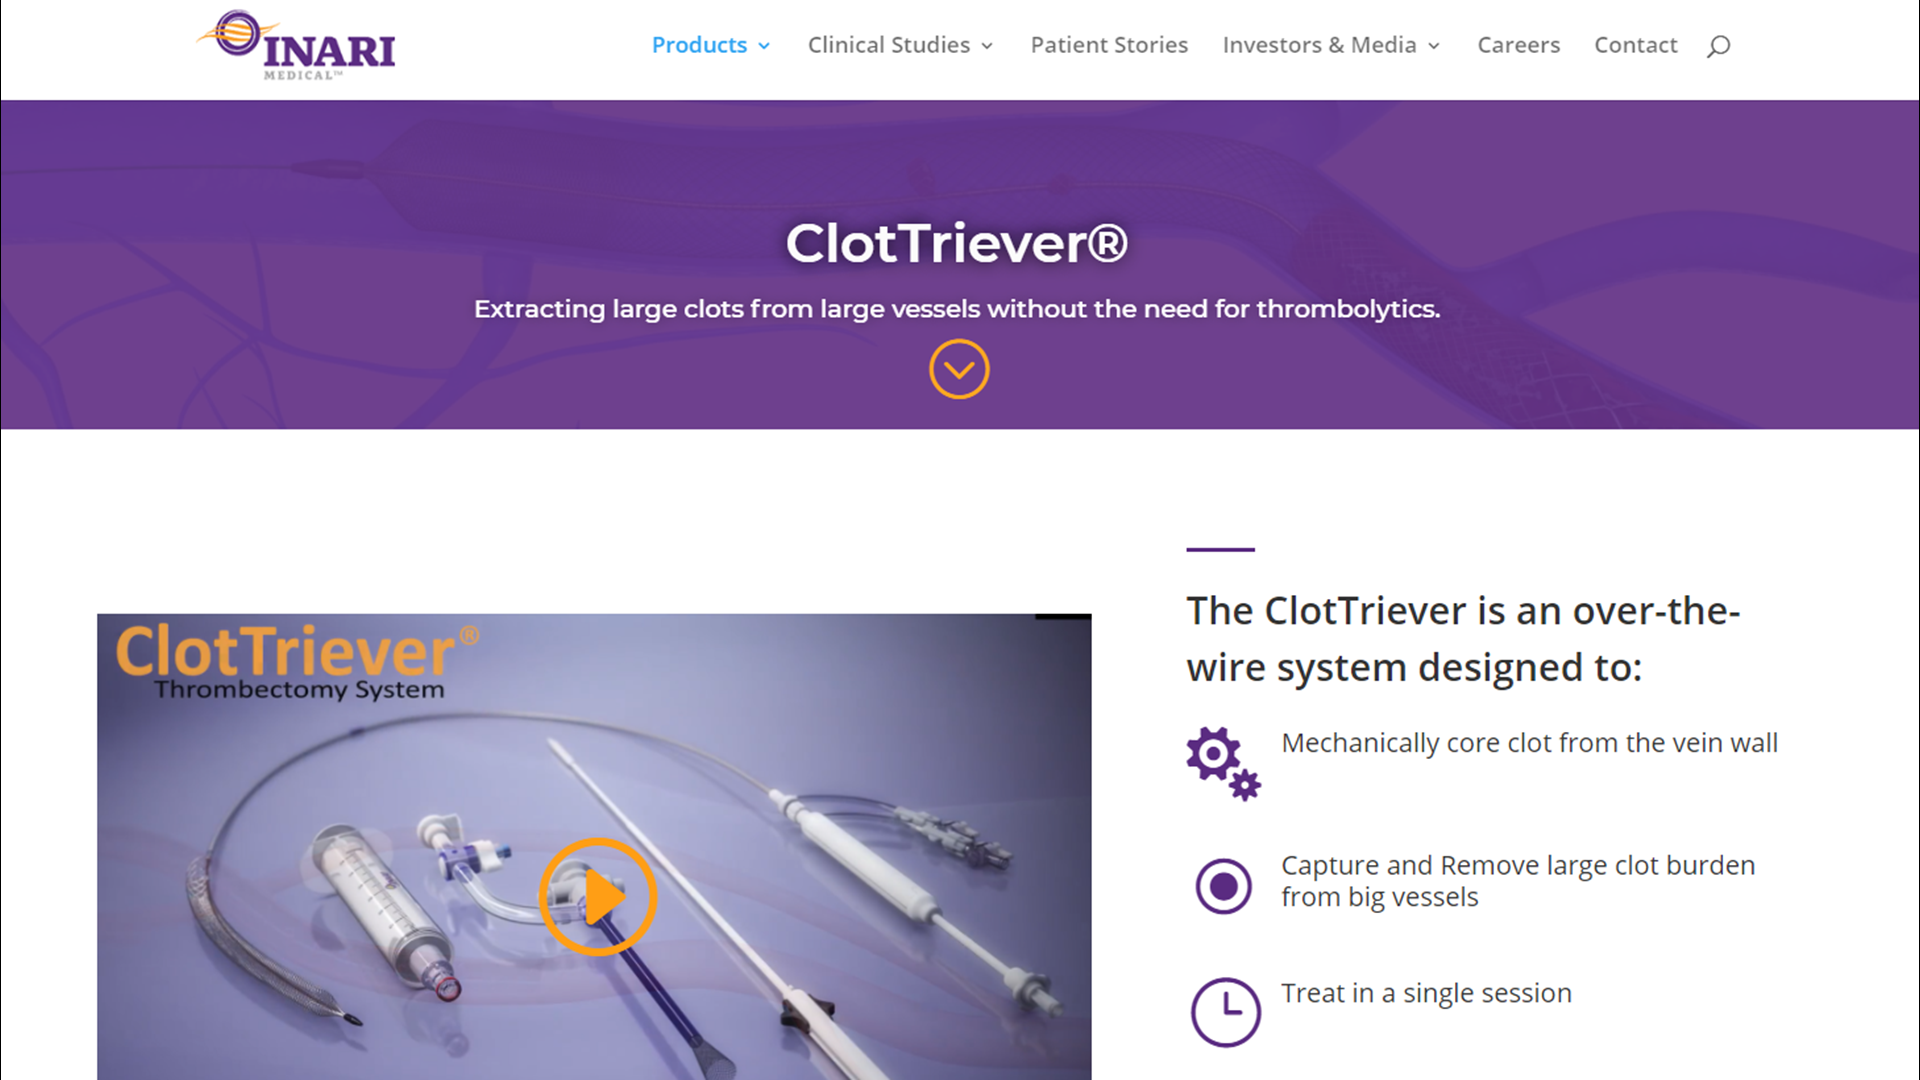 Learn more about the ClotTriever at VascularInstitute.com.